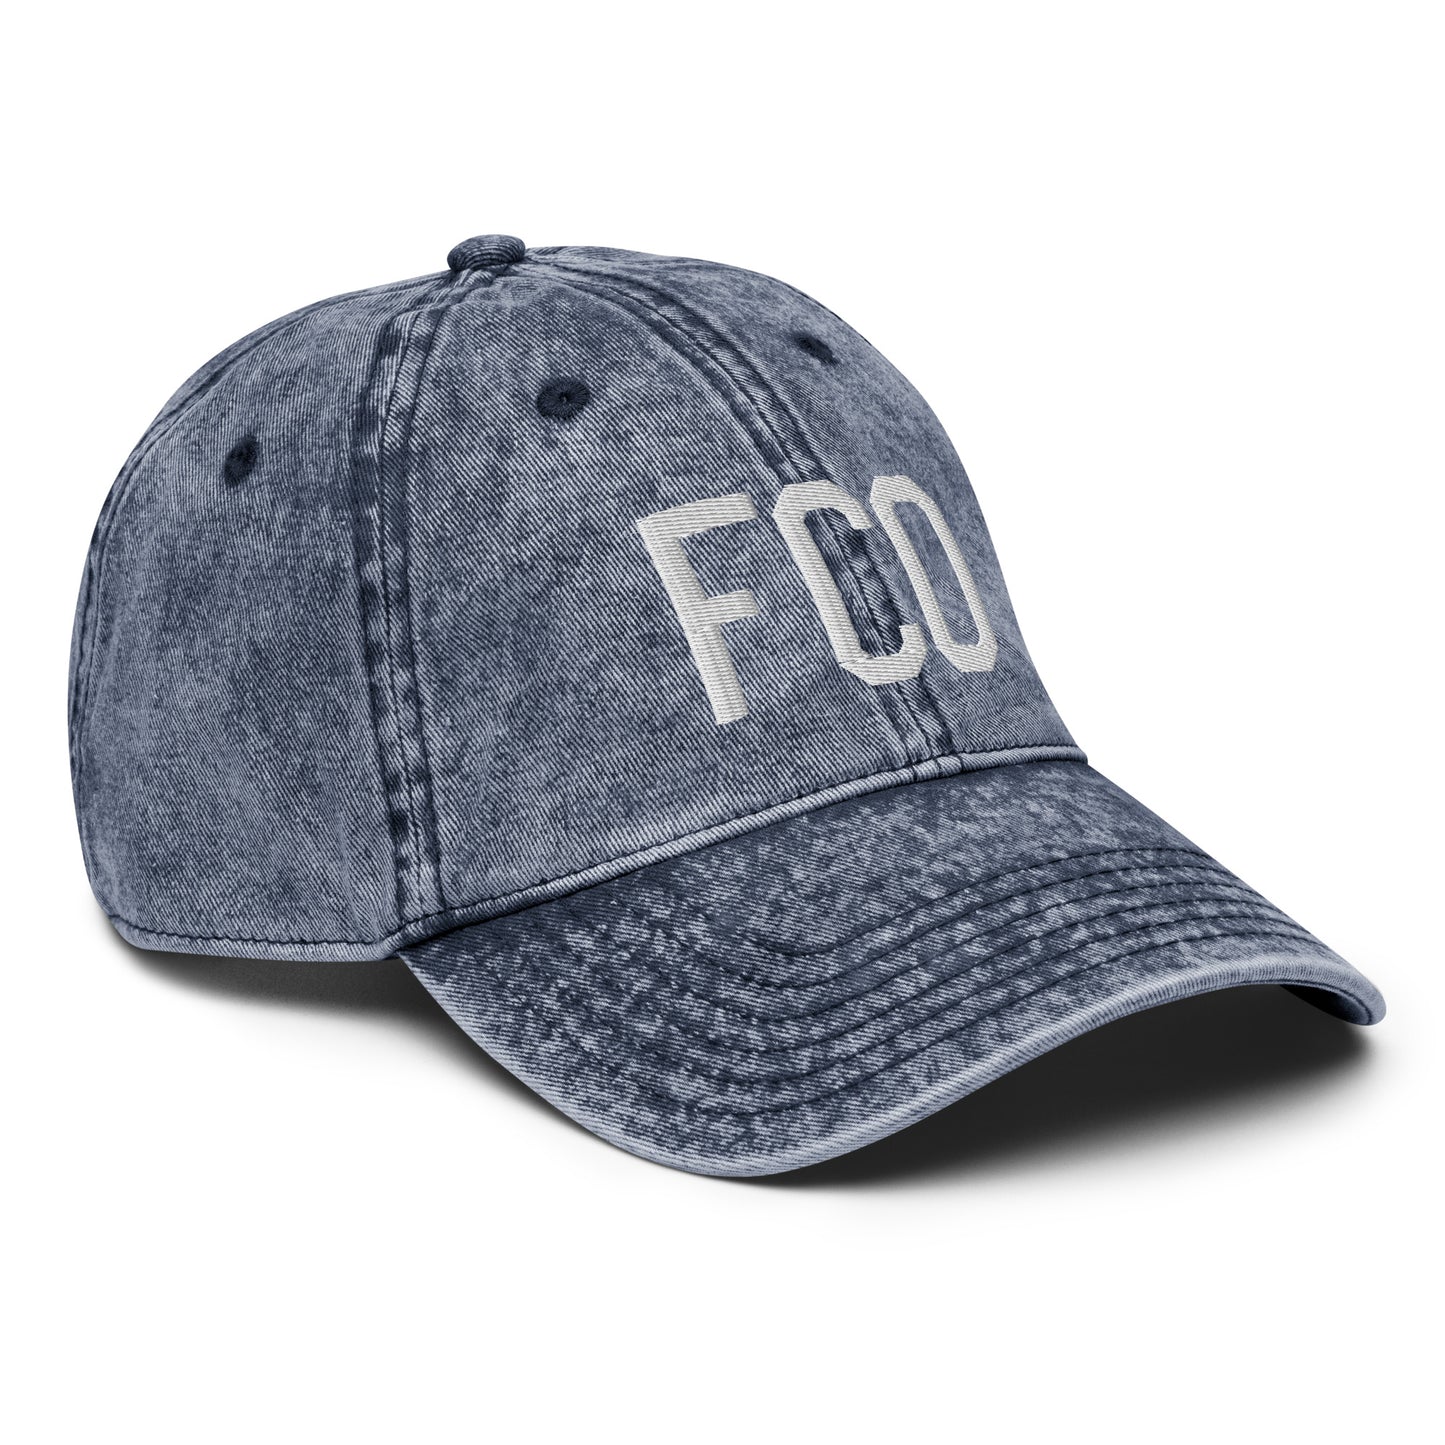 Airport Code Twill Cap - White • FCO Rome • YHM Designs - Image 18